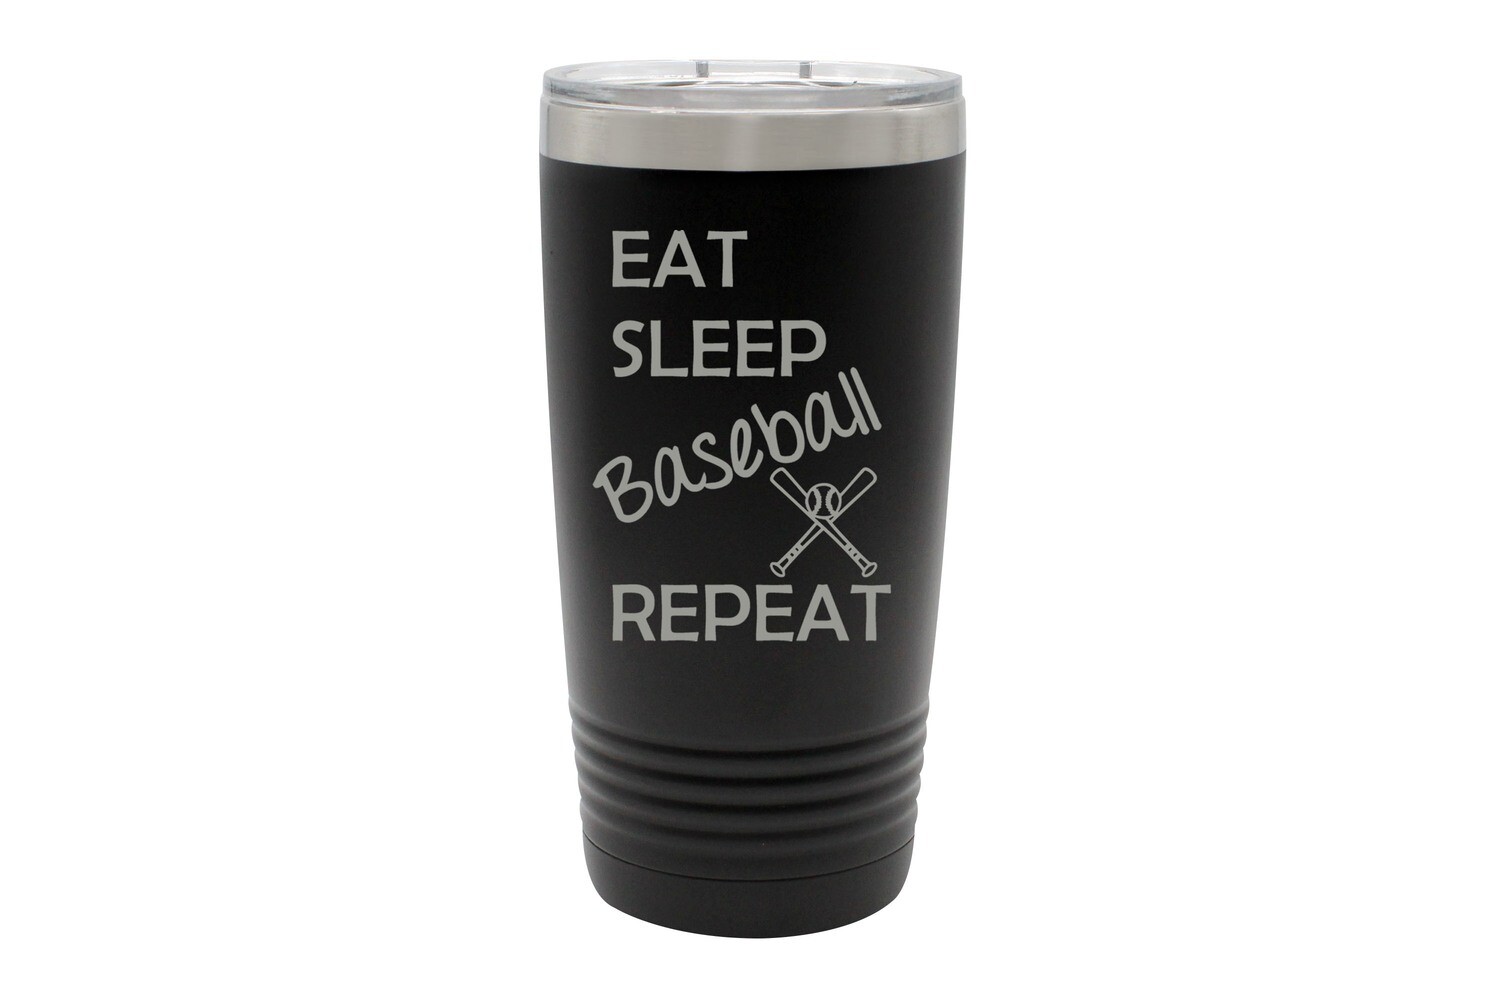 Eat Sleep (Choose from 19 Sports) Repeat Insulated Tumbler 20 oz